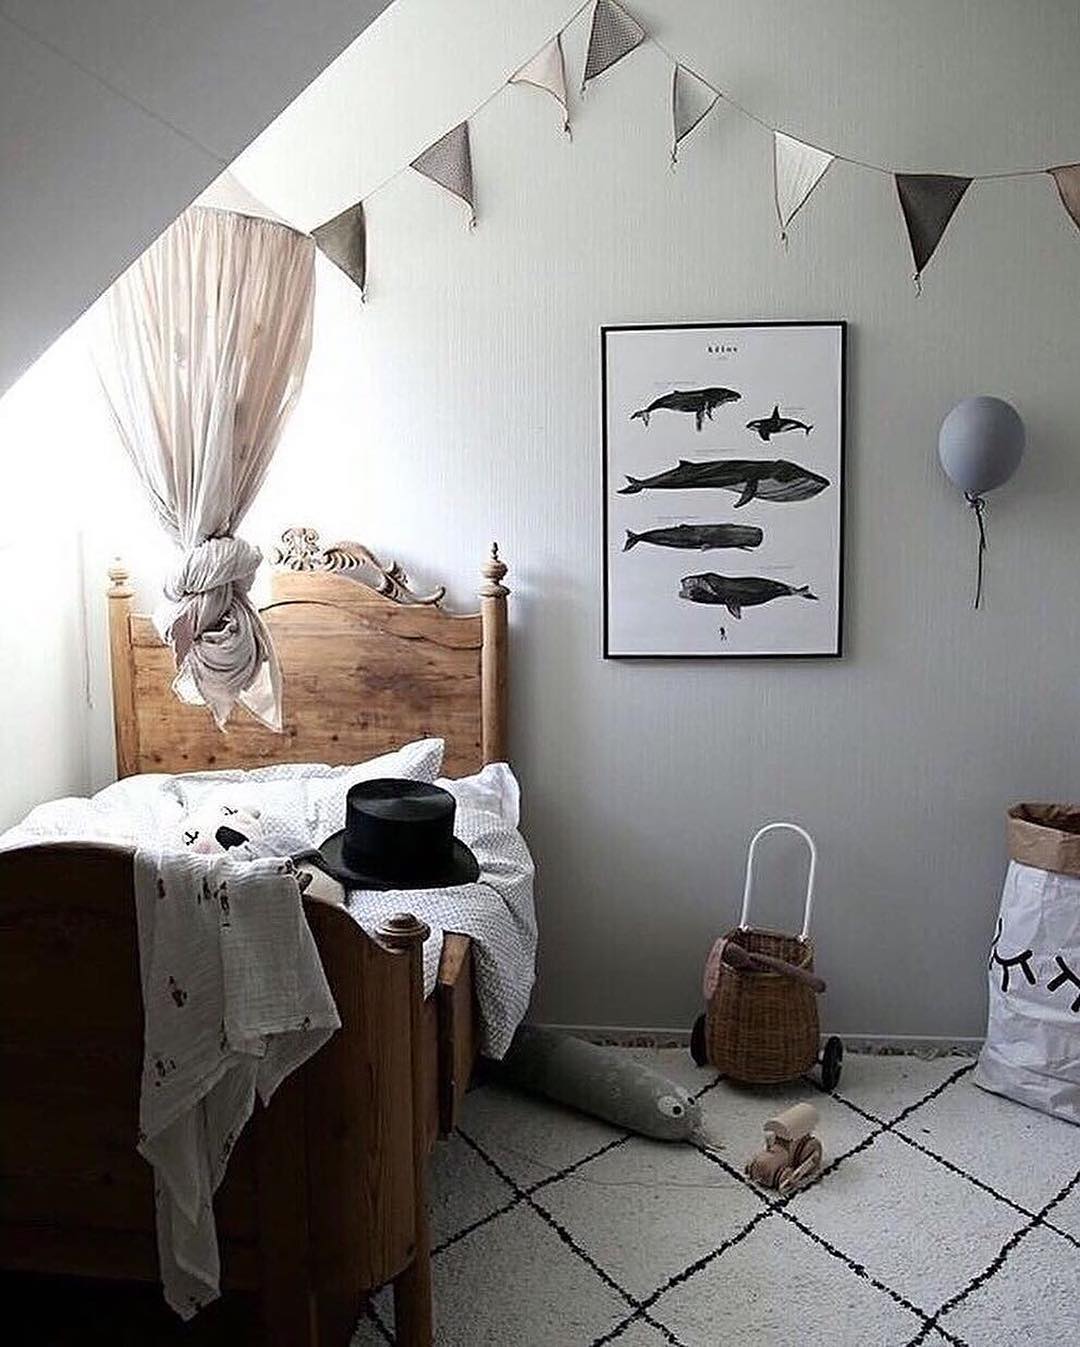 https://www.extraspace.com/blog/wp-content/uploads/2018/01/small-kids-room-ideas-twin-bed-in-the-corner.jpg